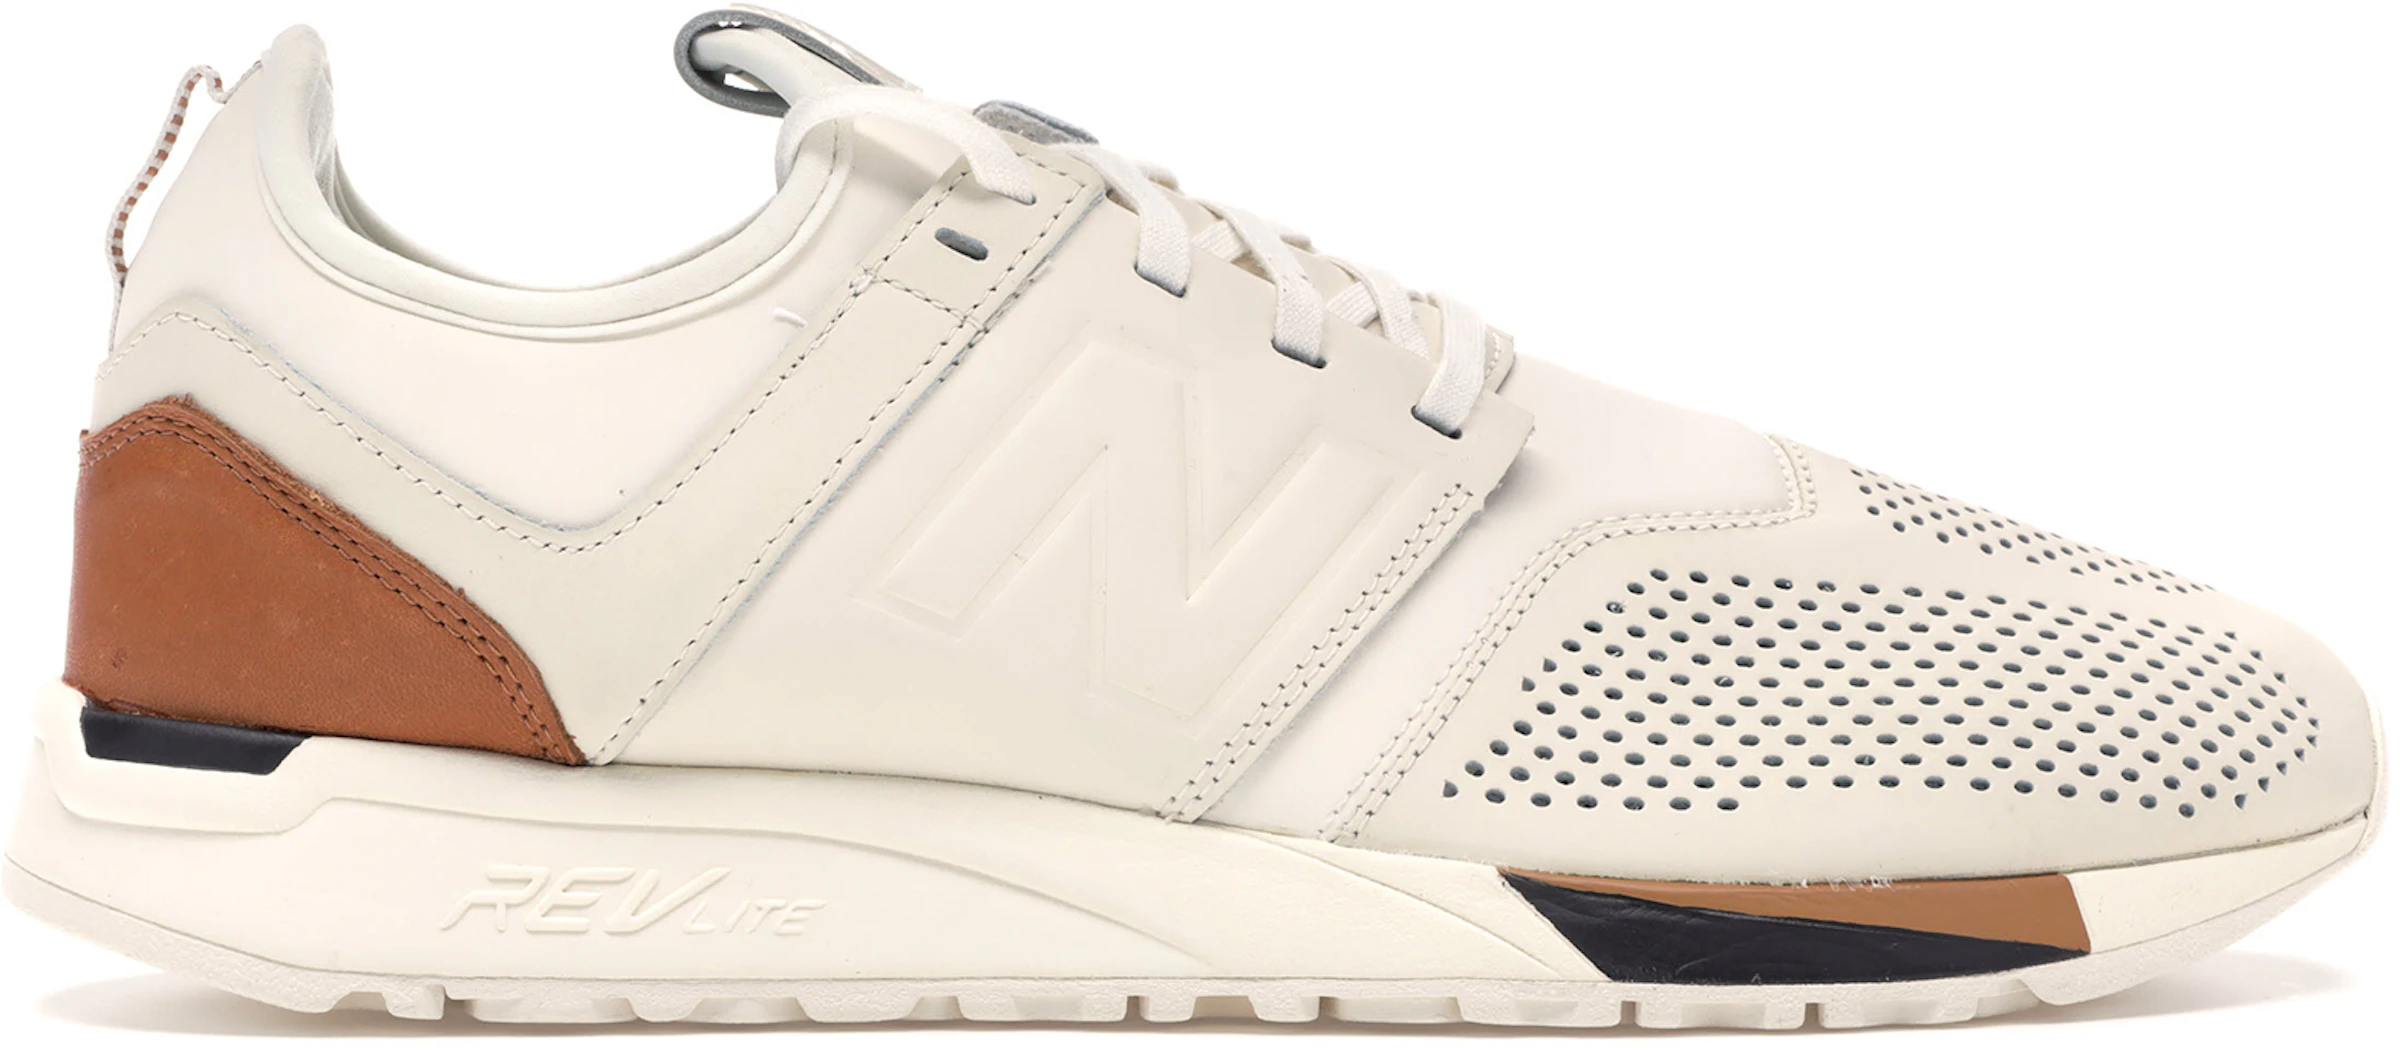 New Balance 247 White Luxe MRL247BE - US